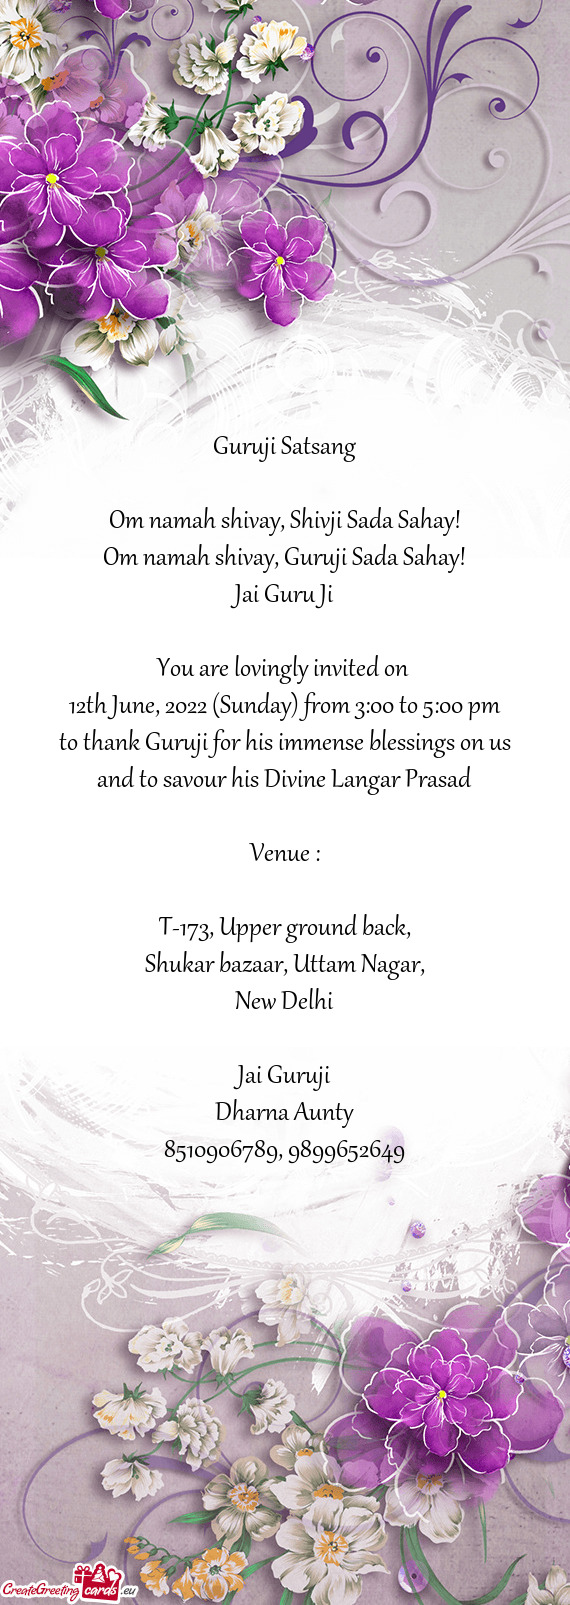 12th June, 2022 (Sunday) from 3:00 to 5:00 pm